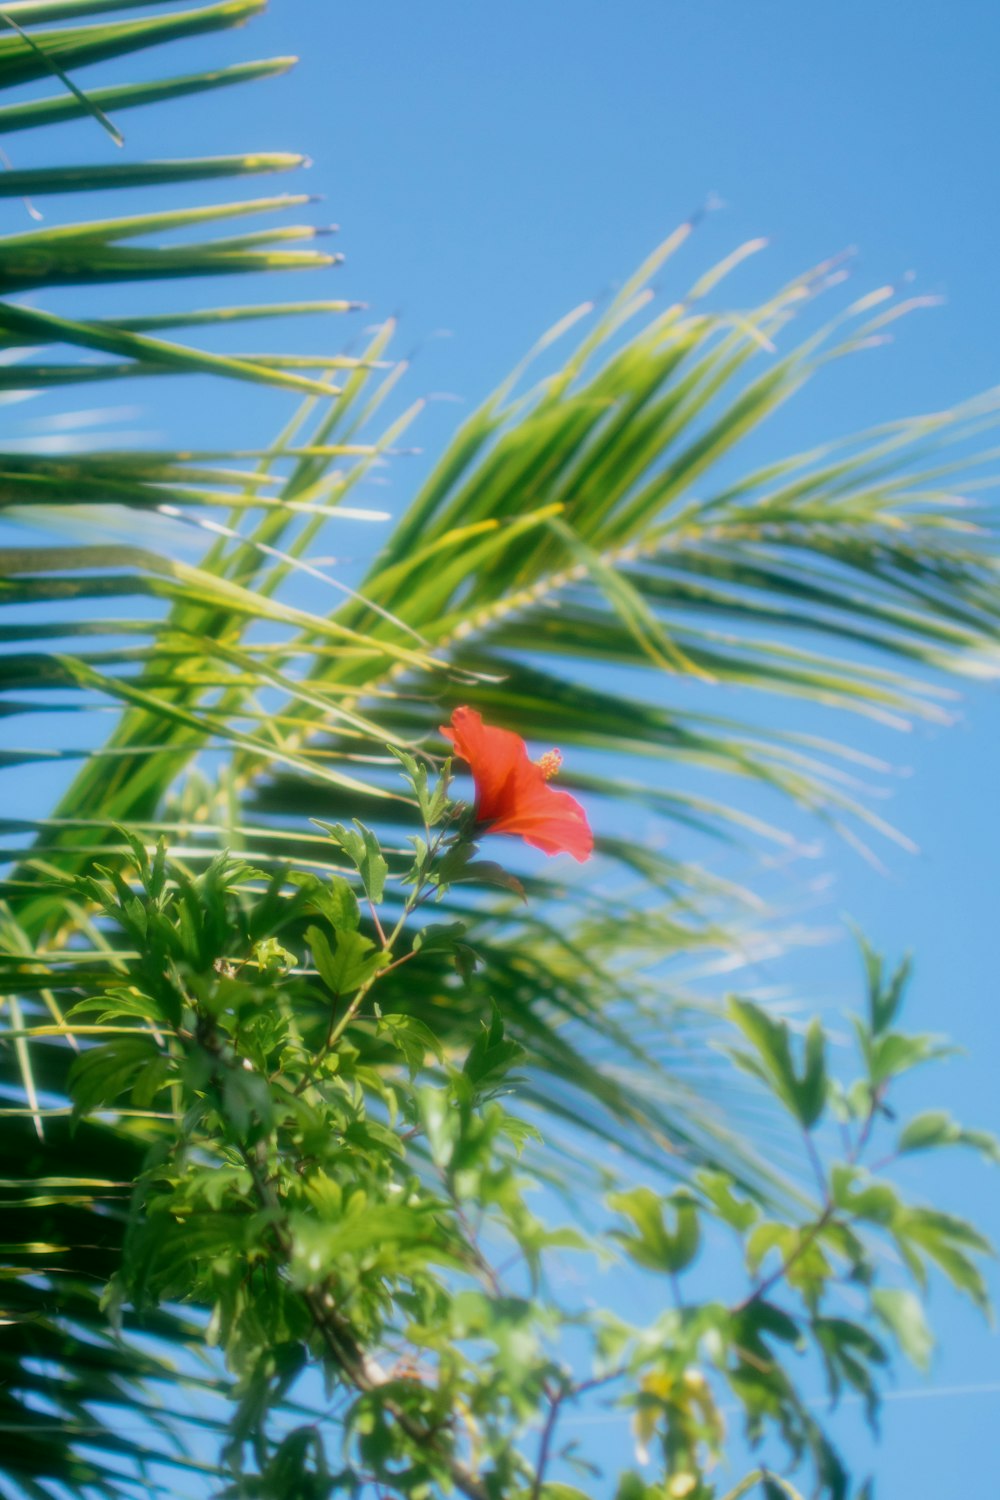 a red flower on a palm tree with a blue sky in the background